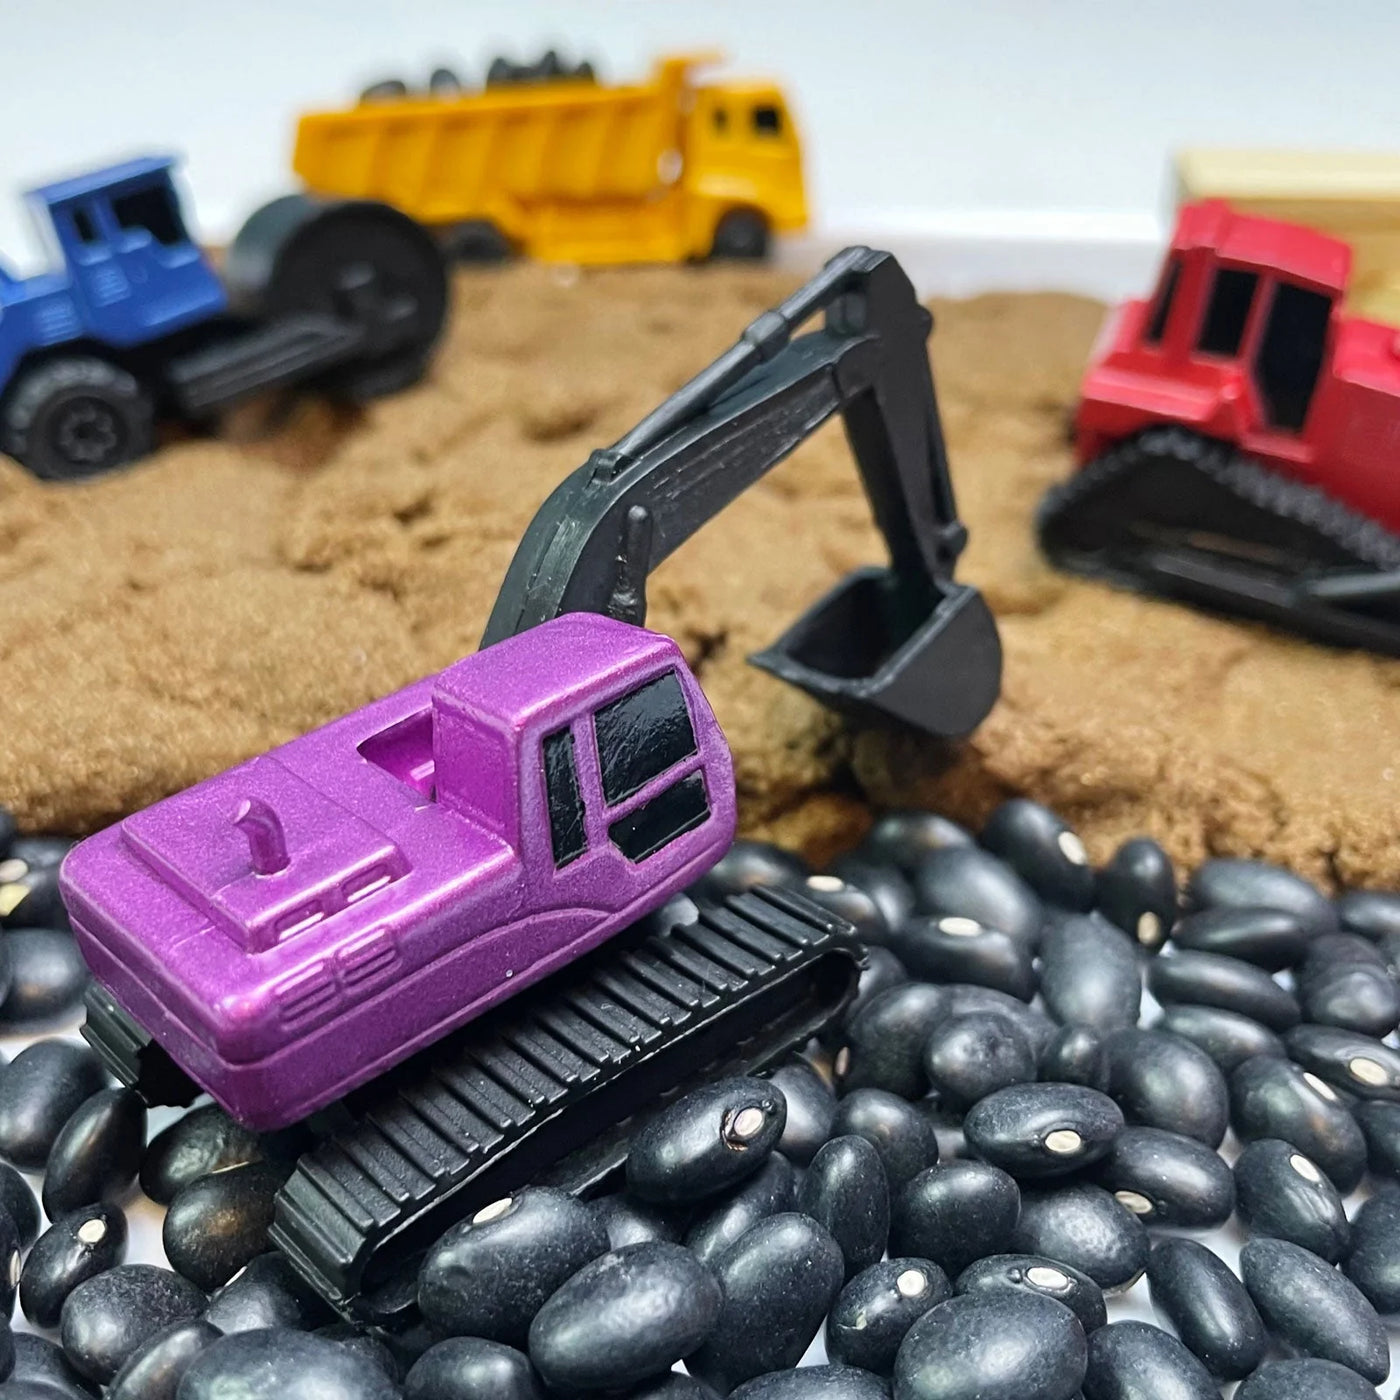 Construction Vehicles Toob® Small World Figures